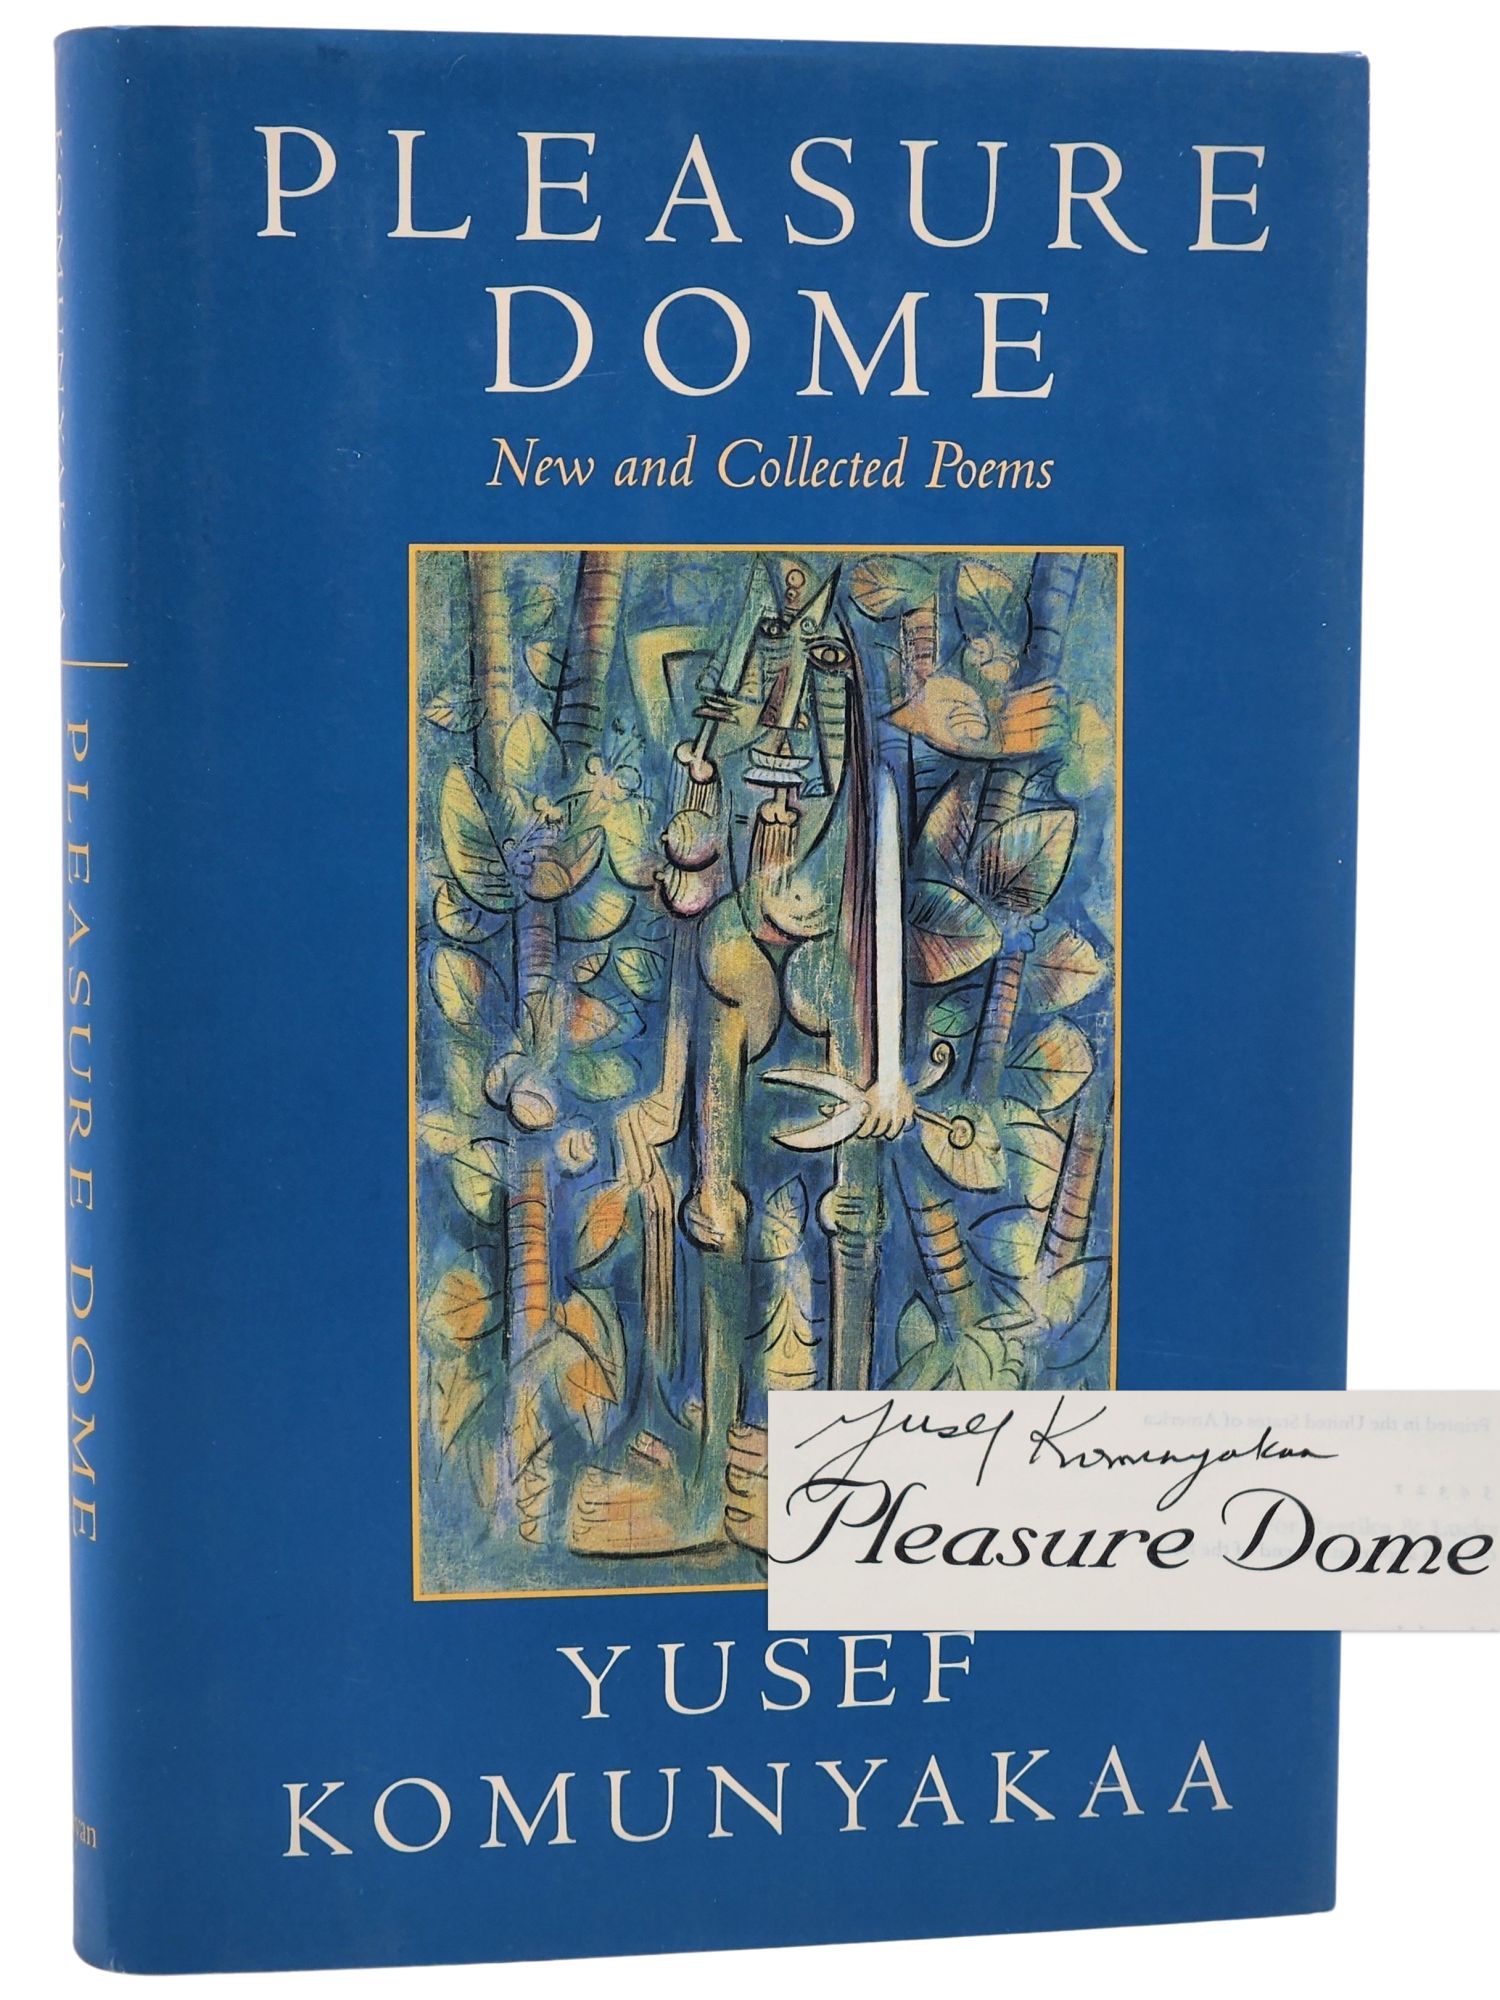 [Book #29286] PLEASURE DOME. New and Collected Poems. Yusef Komunyakaa.